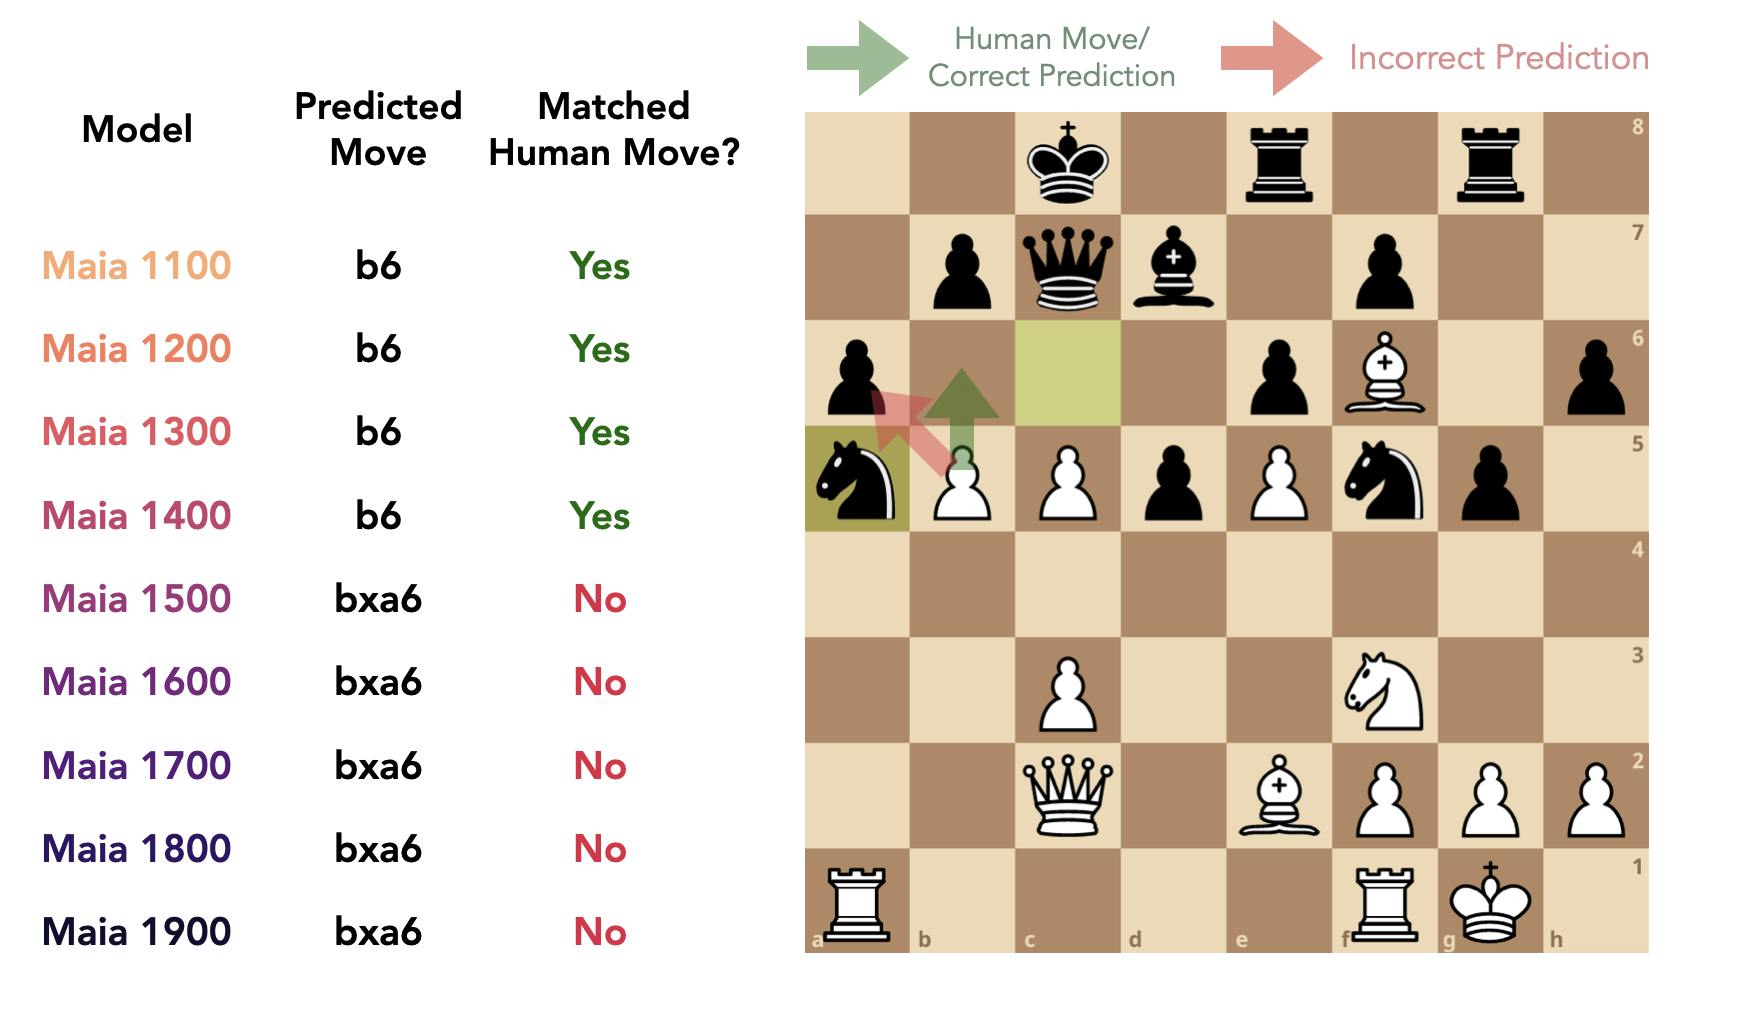 likeawizard's Blog • The importance of caching in chess engines •